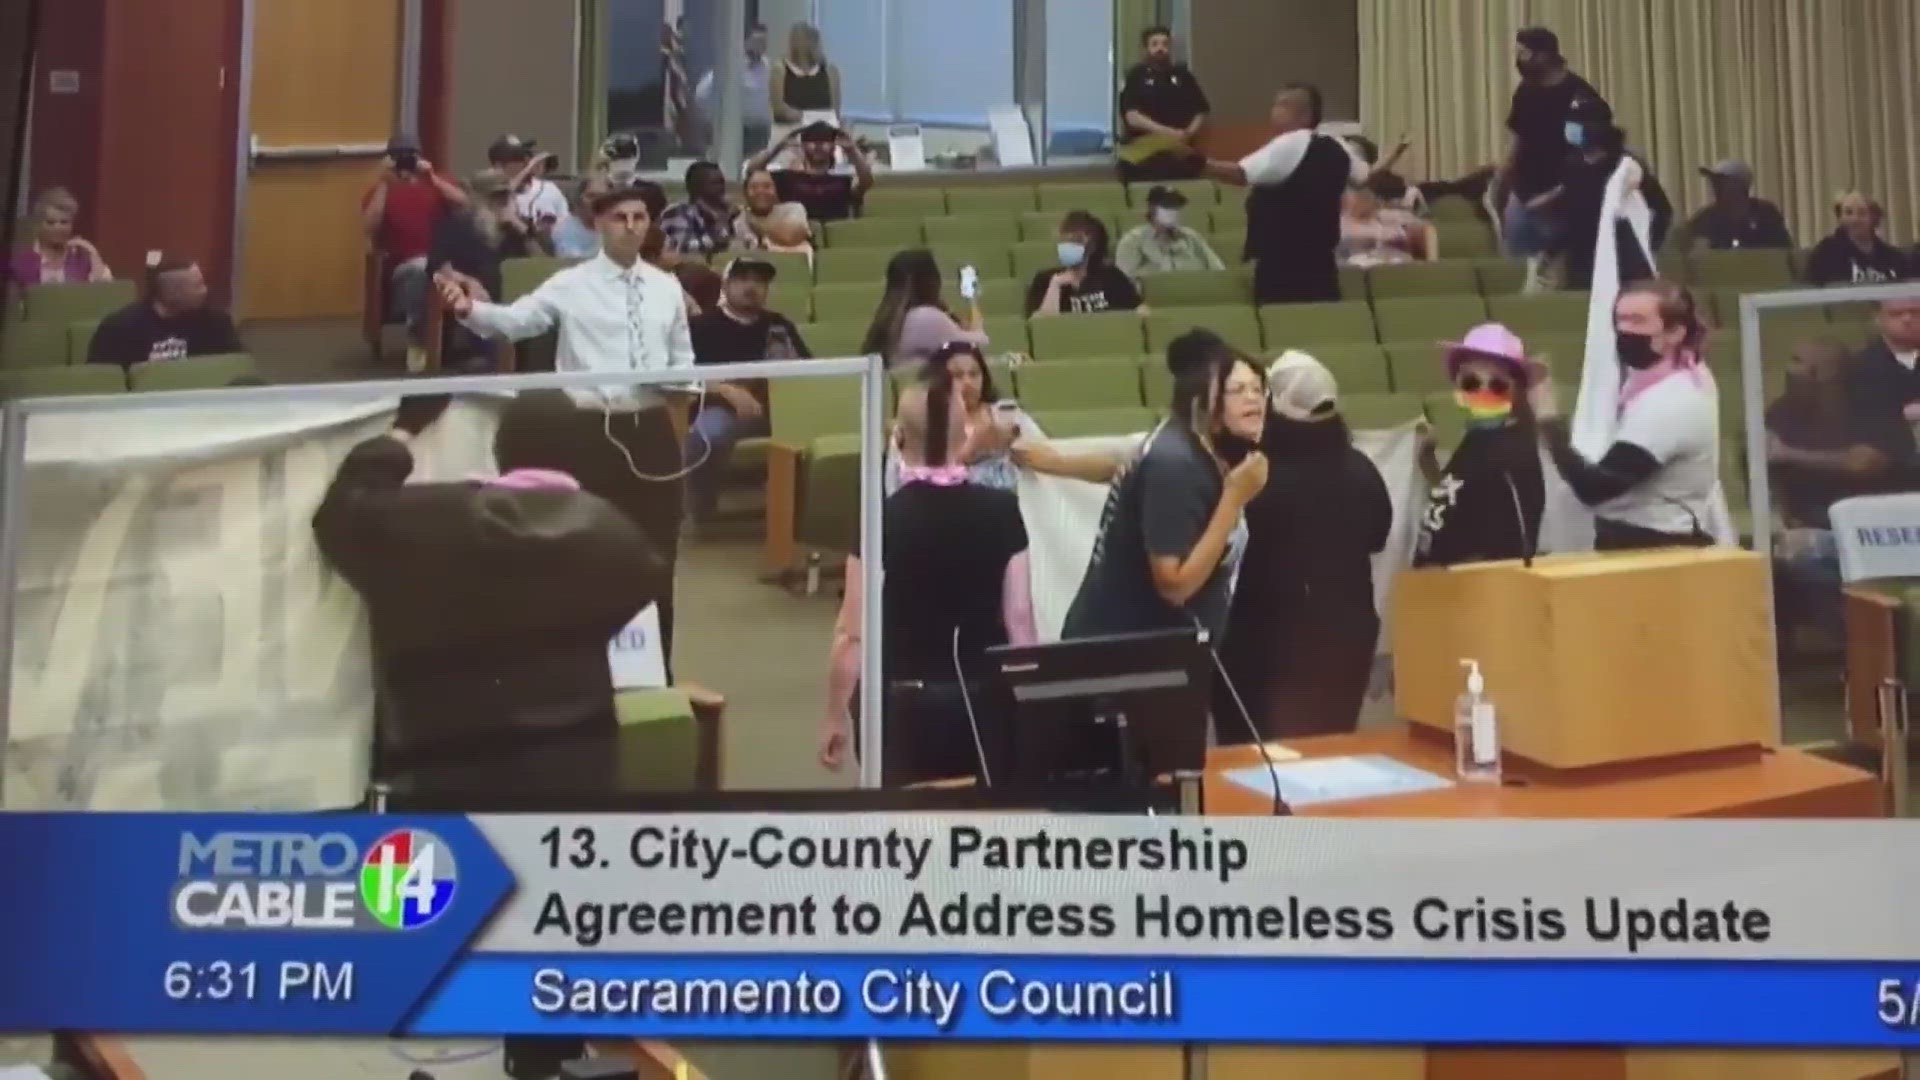 City Councilmember Karina Talamantes said the meeting came "to a halt due to the hatred of a few anti-Semitic and racist individuals."